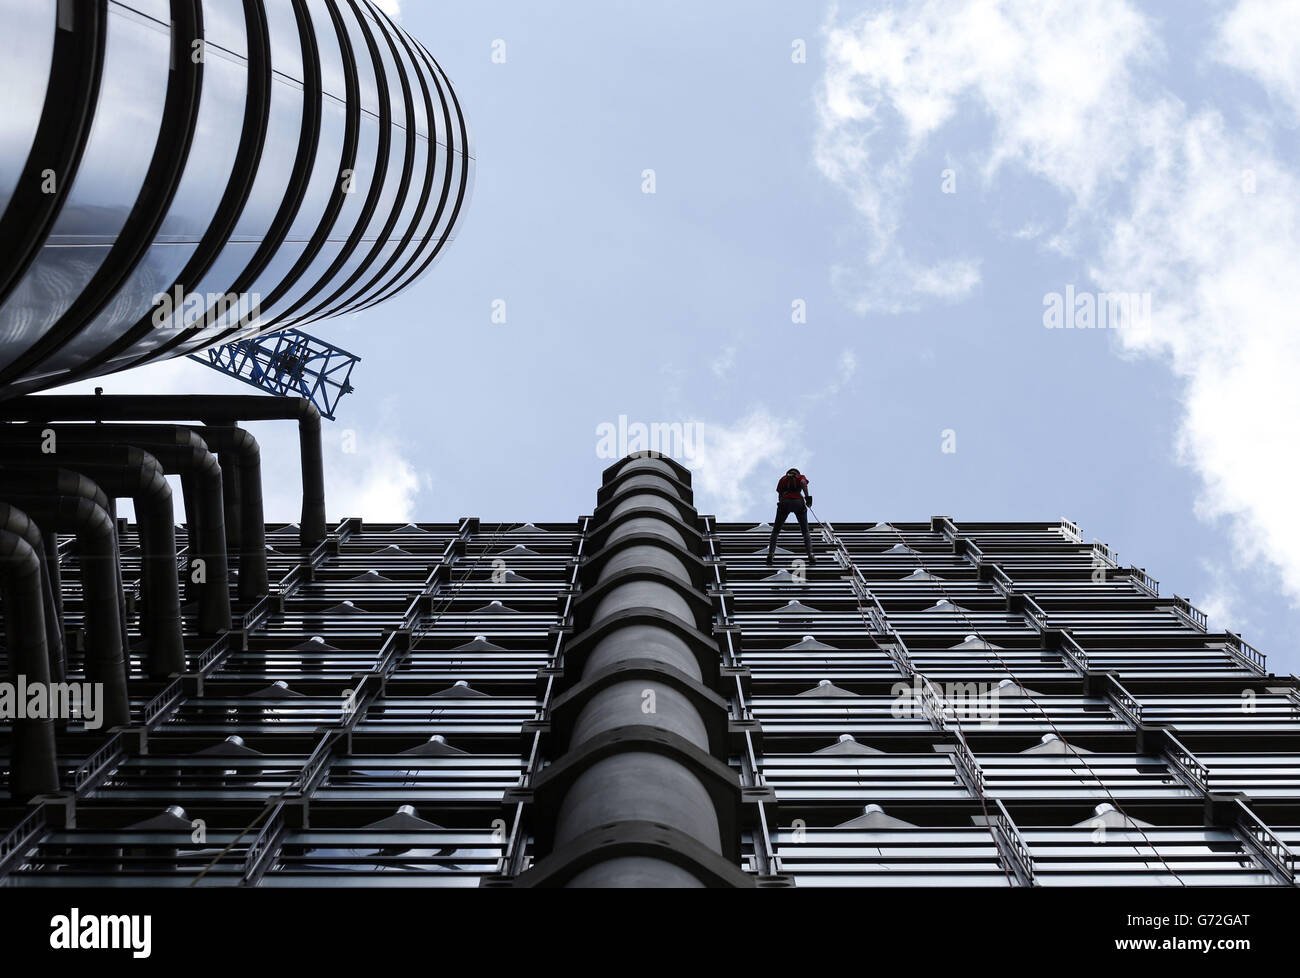 Fundraisers employed in the City of London abseil down the Lloyds of London building in aid of the charity RedR UK. Stock Photo